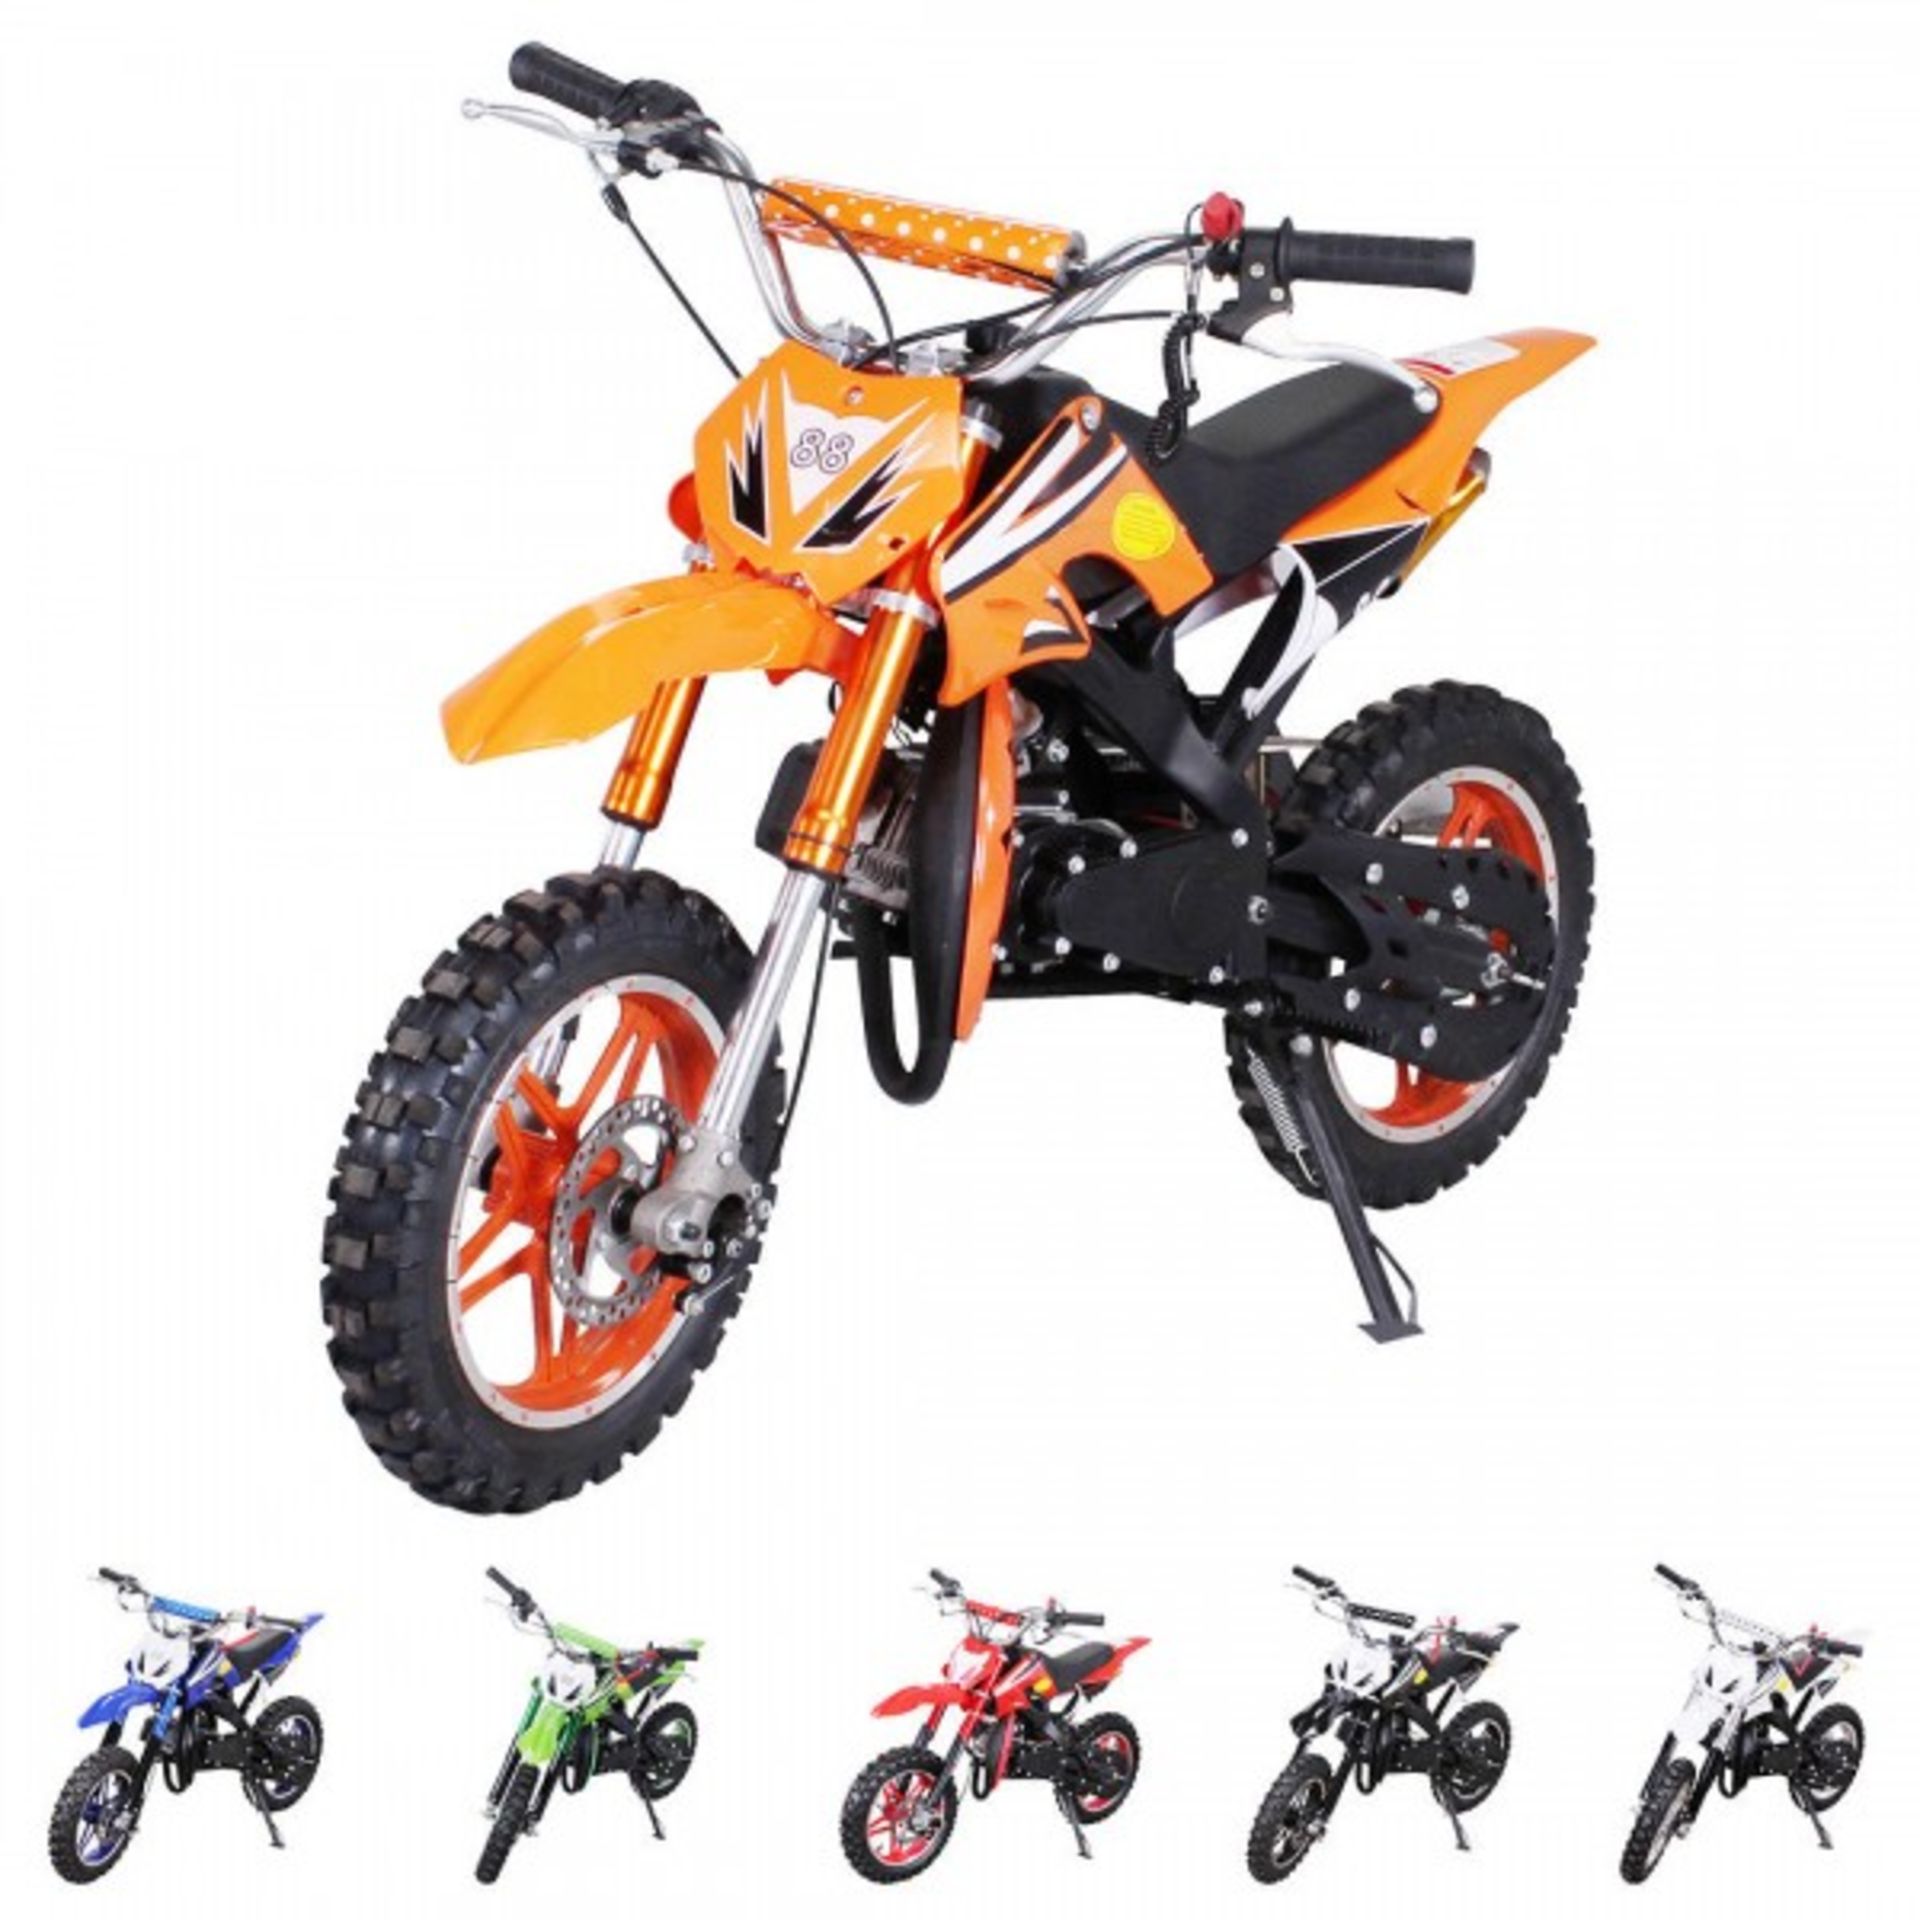 V Brand New 50cc Delta Mini Bike - Colour May Vary - Two Stroke - Single Cylinder - Image 3 of 3